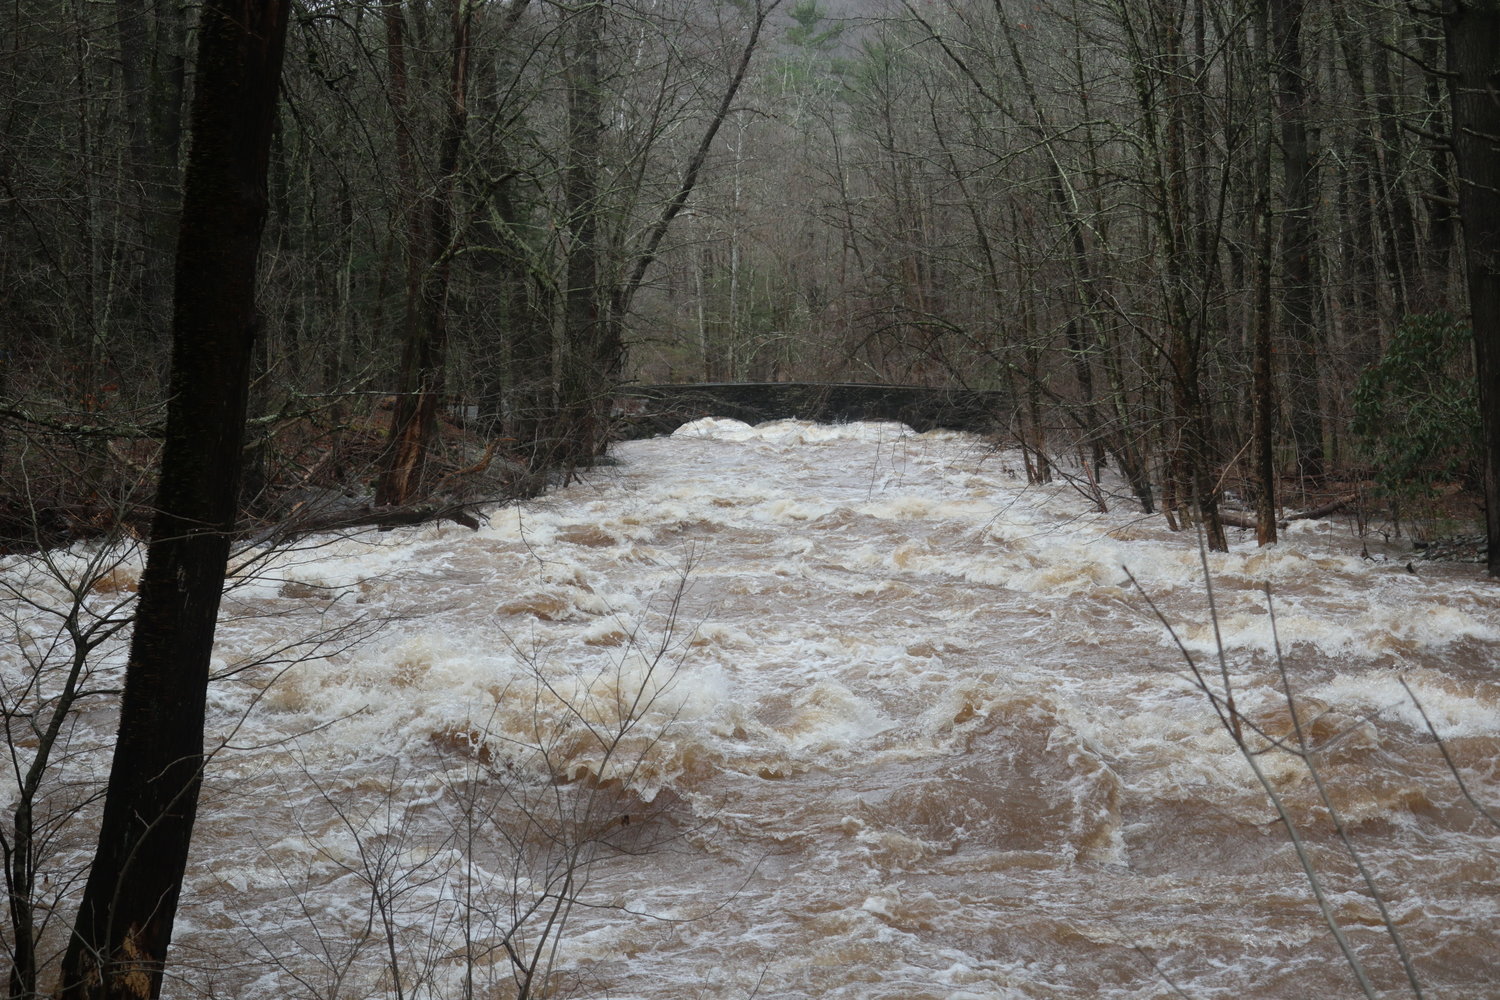 Nearly three inches of rain fell on Thursday, April 7 and caused harardous driving and localized flooding. According to waterdata.usgs.gov, the Delaware River crested at 16.52 feet at Barryville on April 8 at noon.